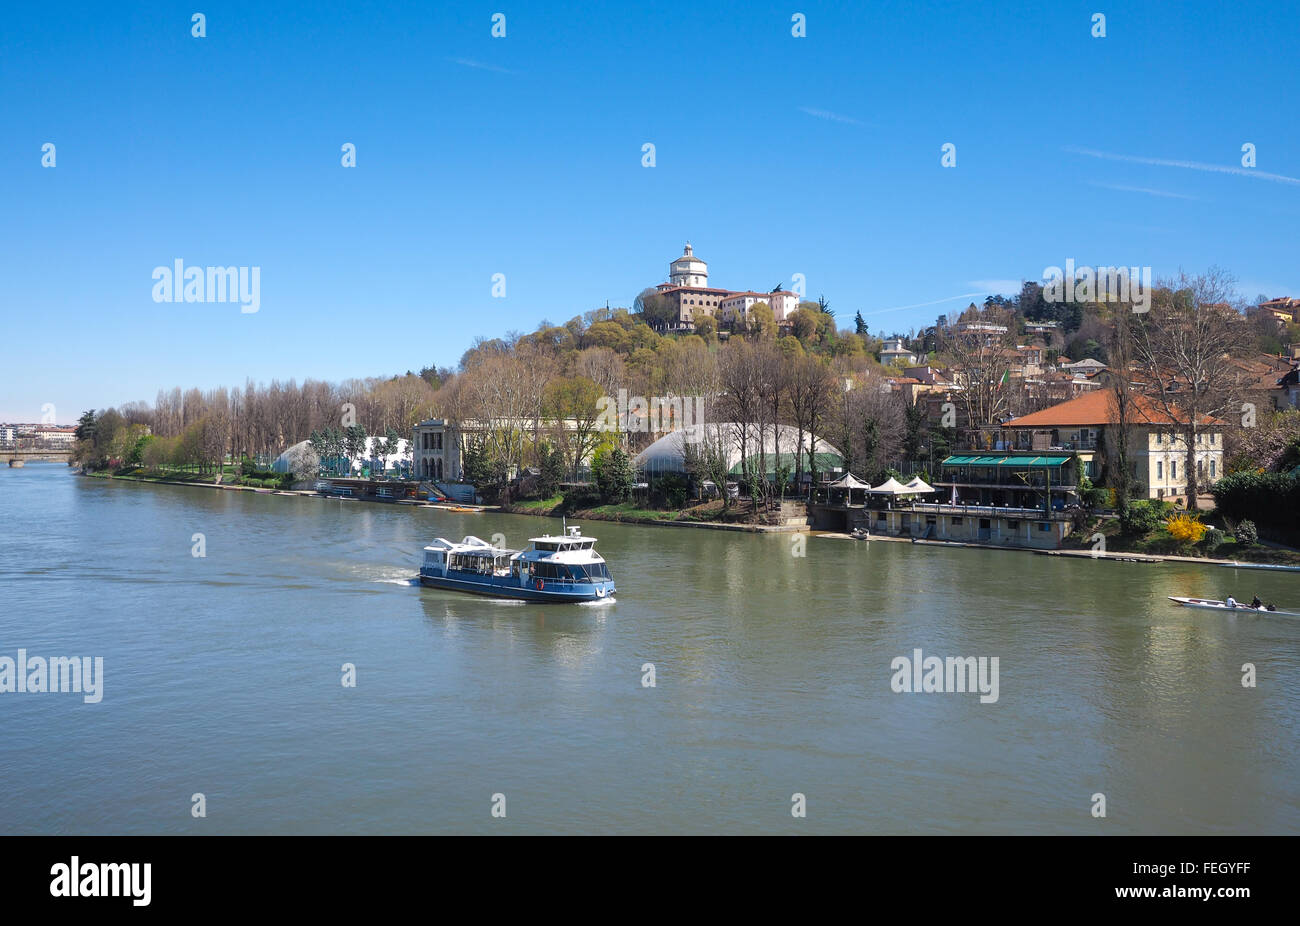 Tourist boat on Po river in Turin, Piedmont (Northern Italy), with Monte dei Cappuccini church in the background. Stock Photo